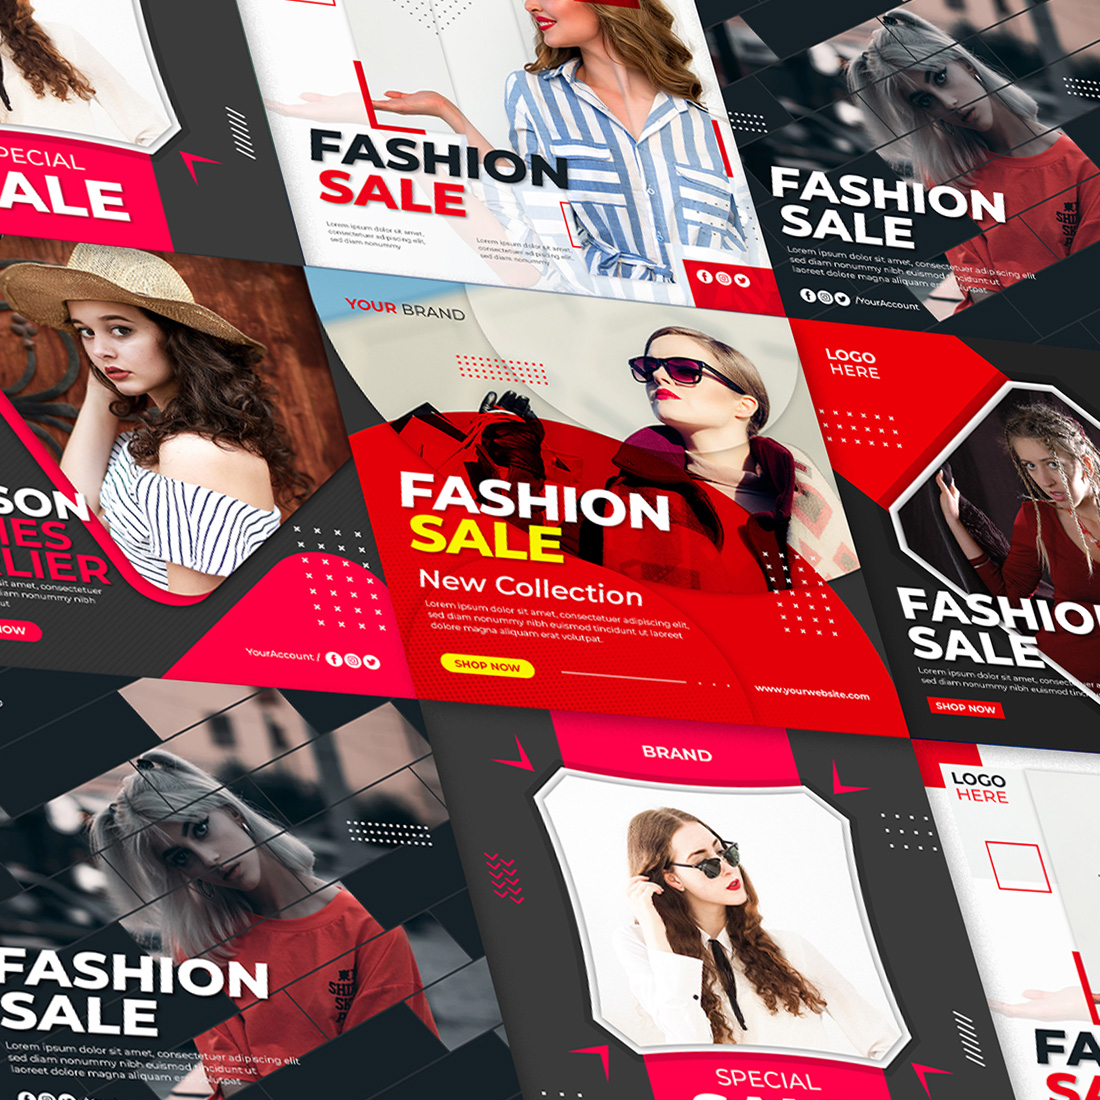 Fashion Sale Square Flyer for Social Media Post 6 Set Template cover image.